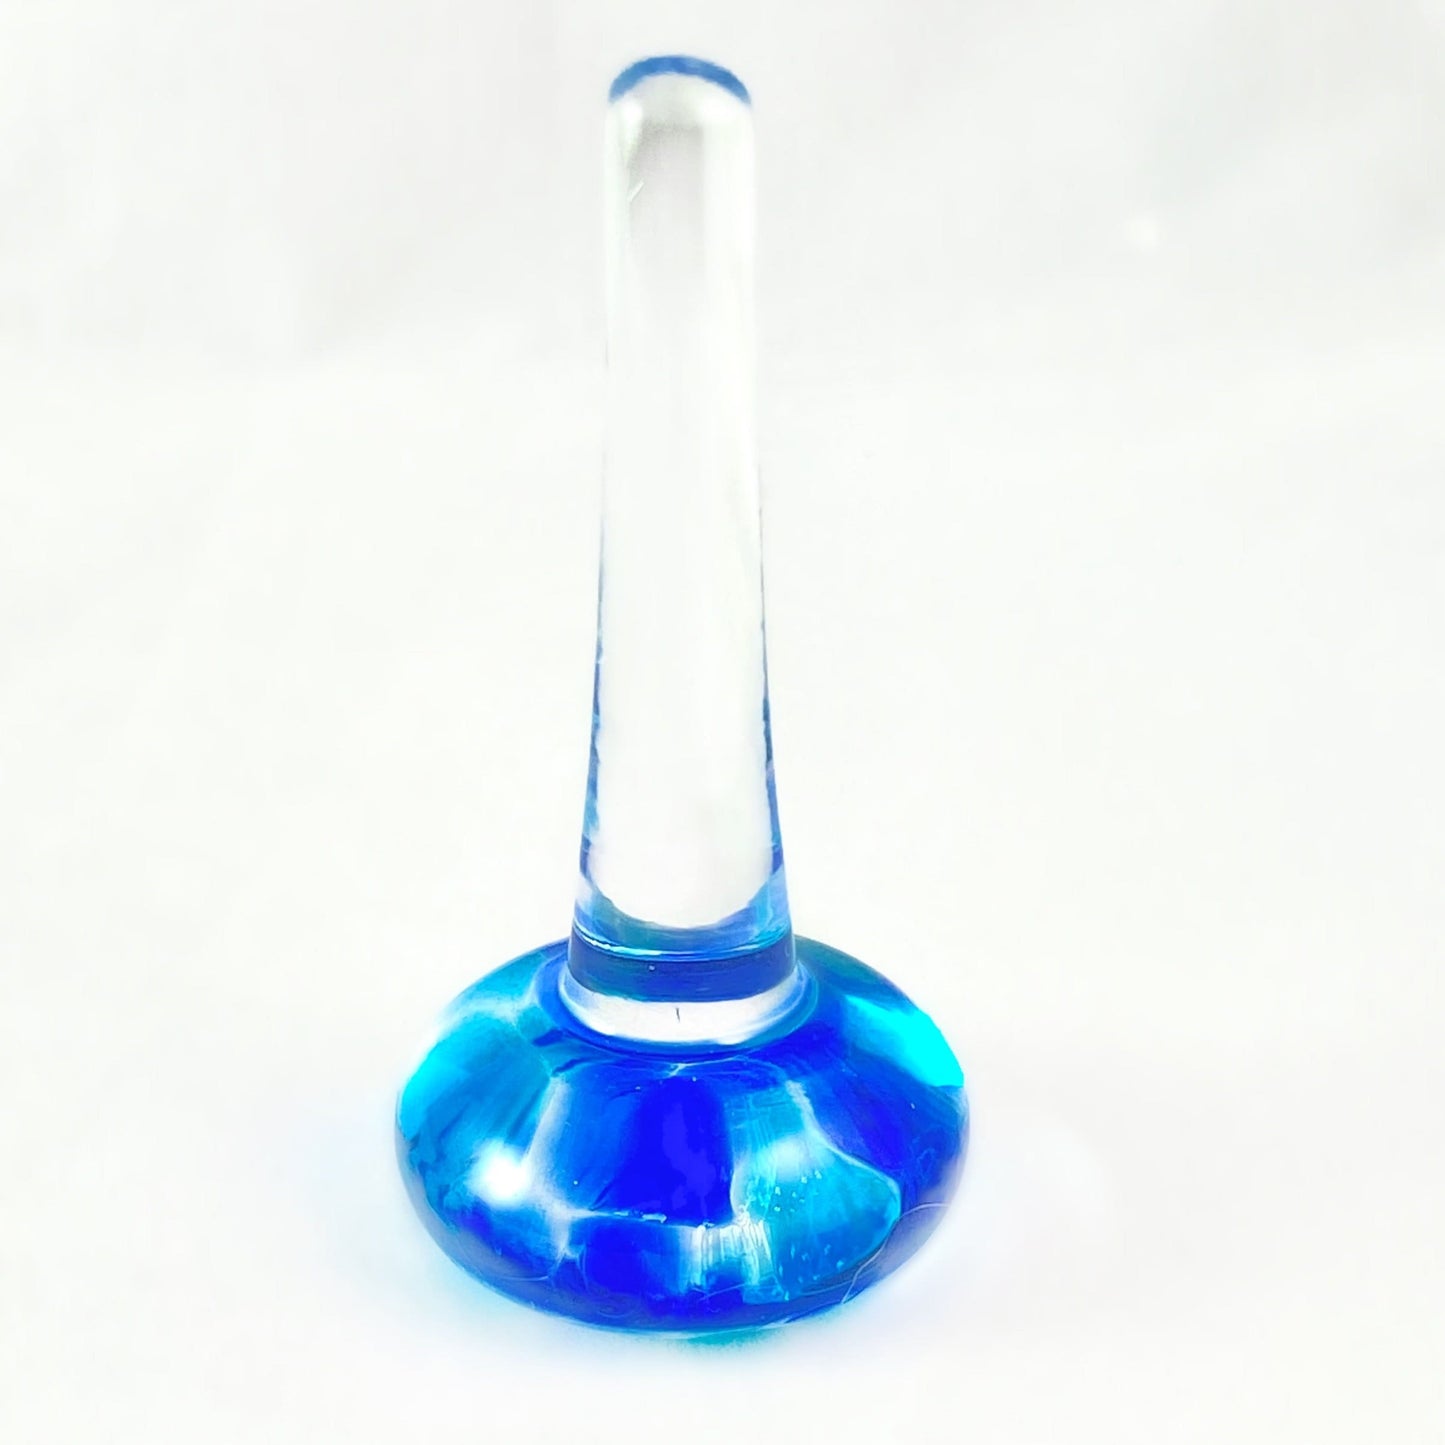 Hand Blown Glass Ring Holder, #12 - Unique Jewelry Storage, Made in USA